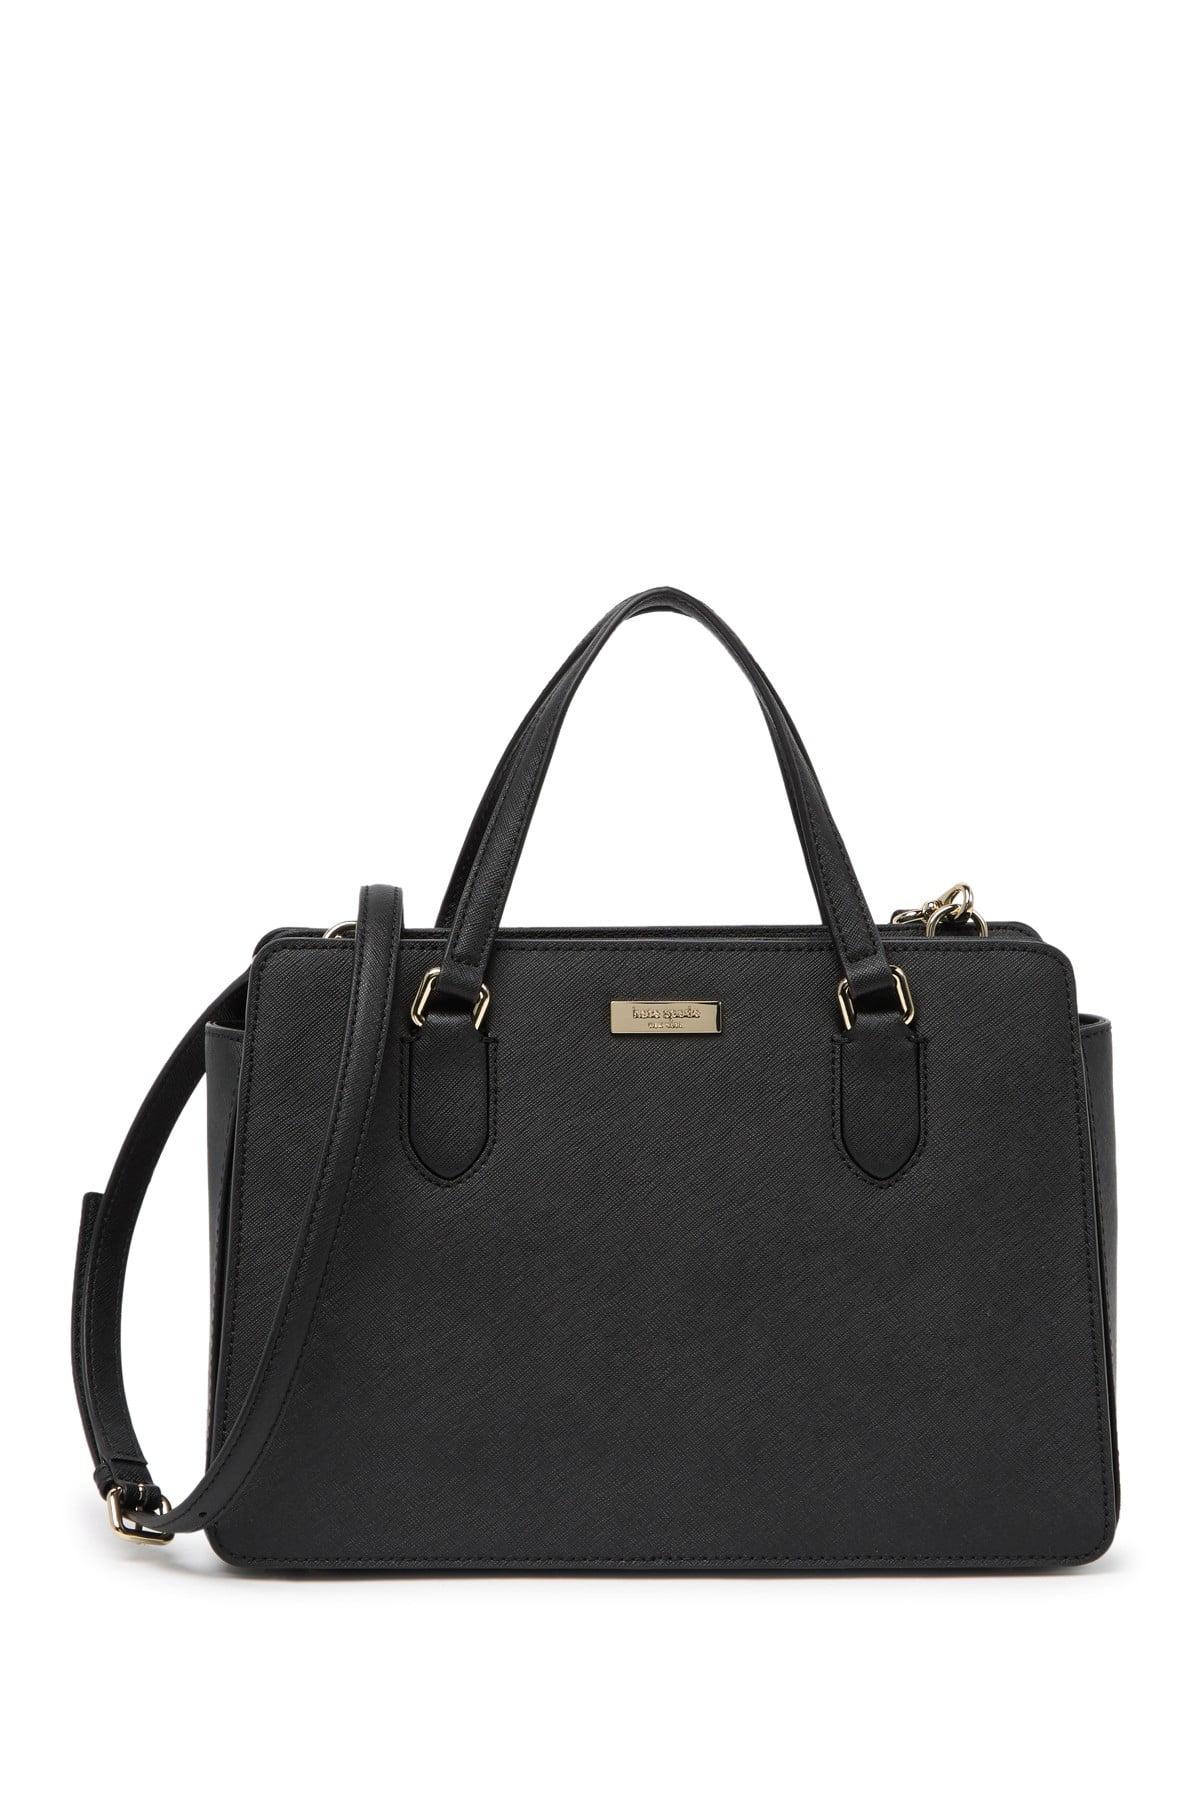 Kate Spade Laurel Way Reese Saffiano Leather Satchel in Black | Lyst